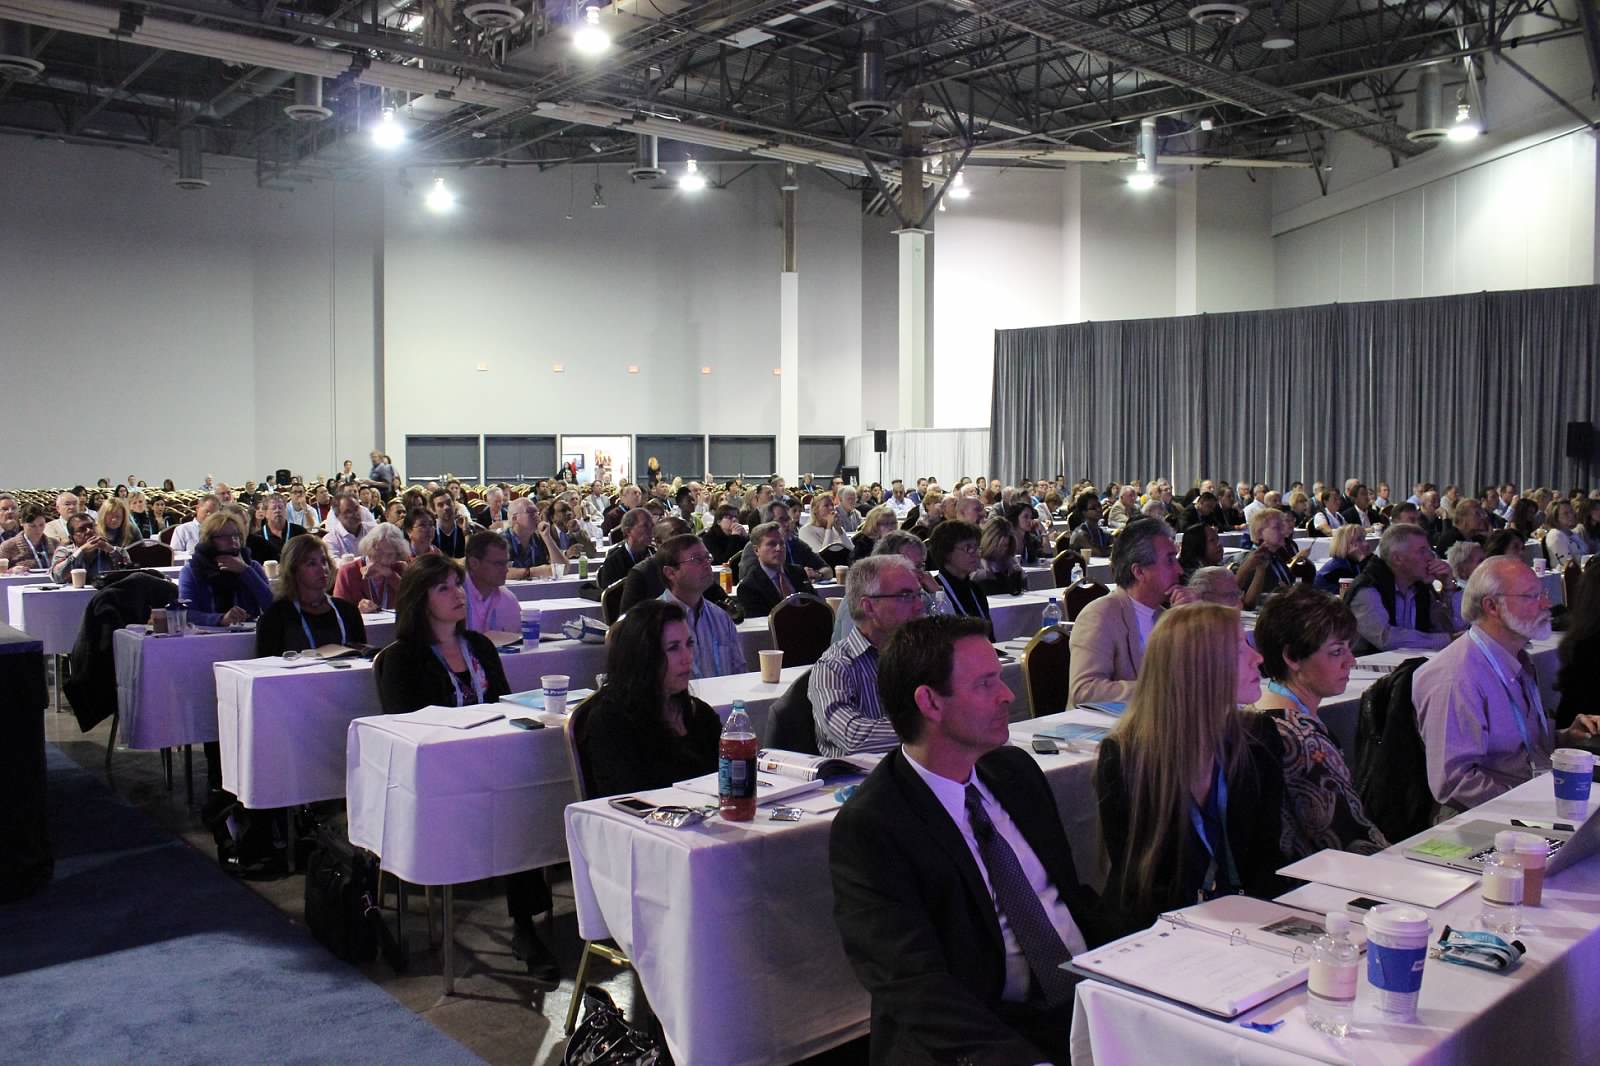 Medical professionals from all over the world sit in on the general session lecture in Las Vegas.